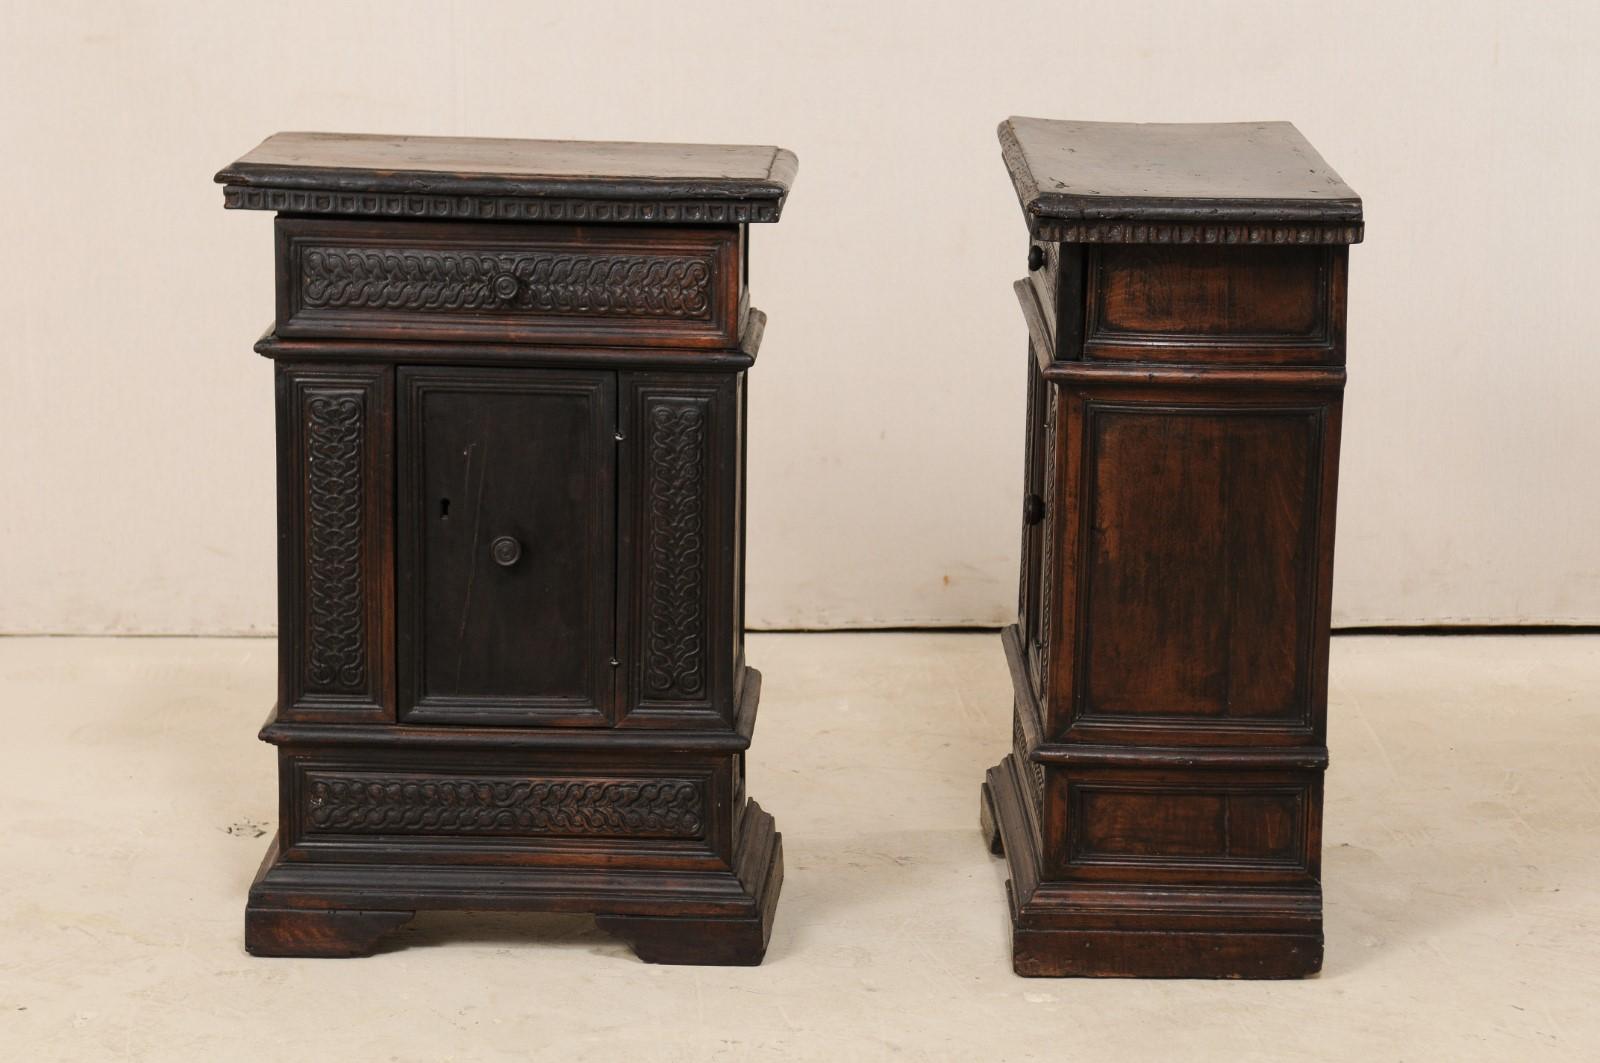 Hand-Carved An Italian Pair of Small-Sized 18th C. Carved-Walnut Side Chests or Nightstands